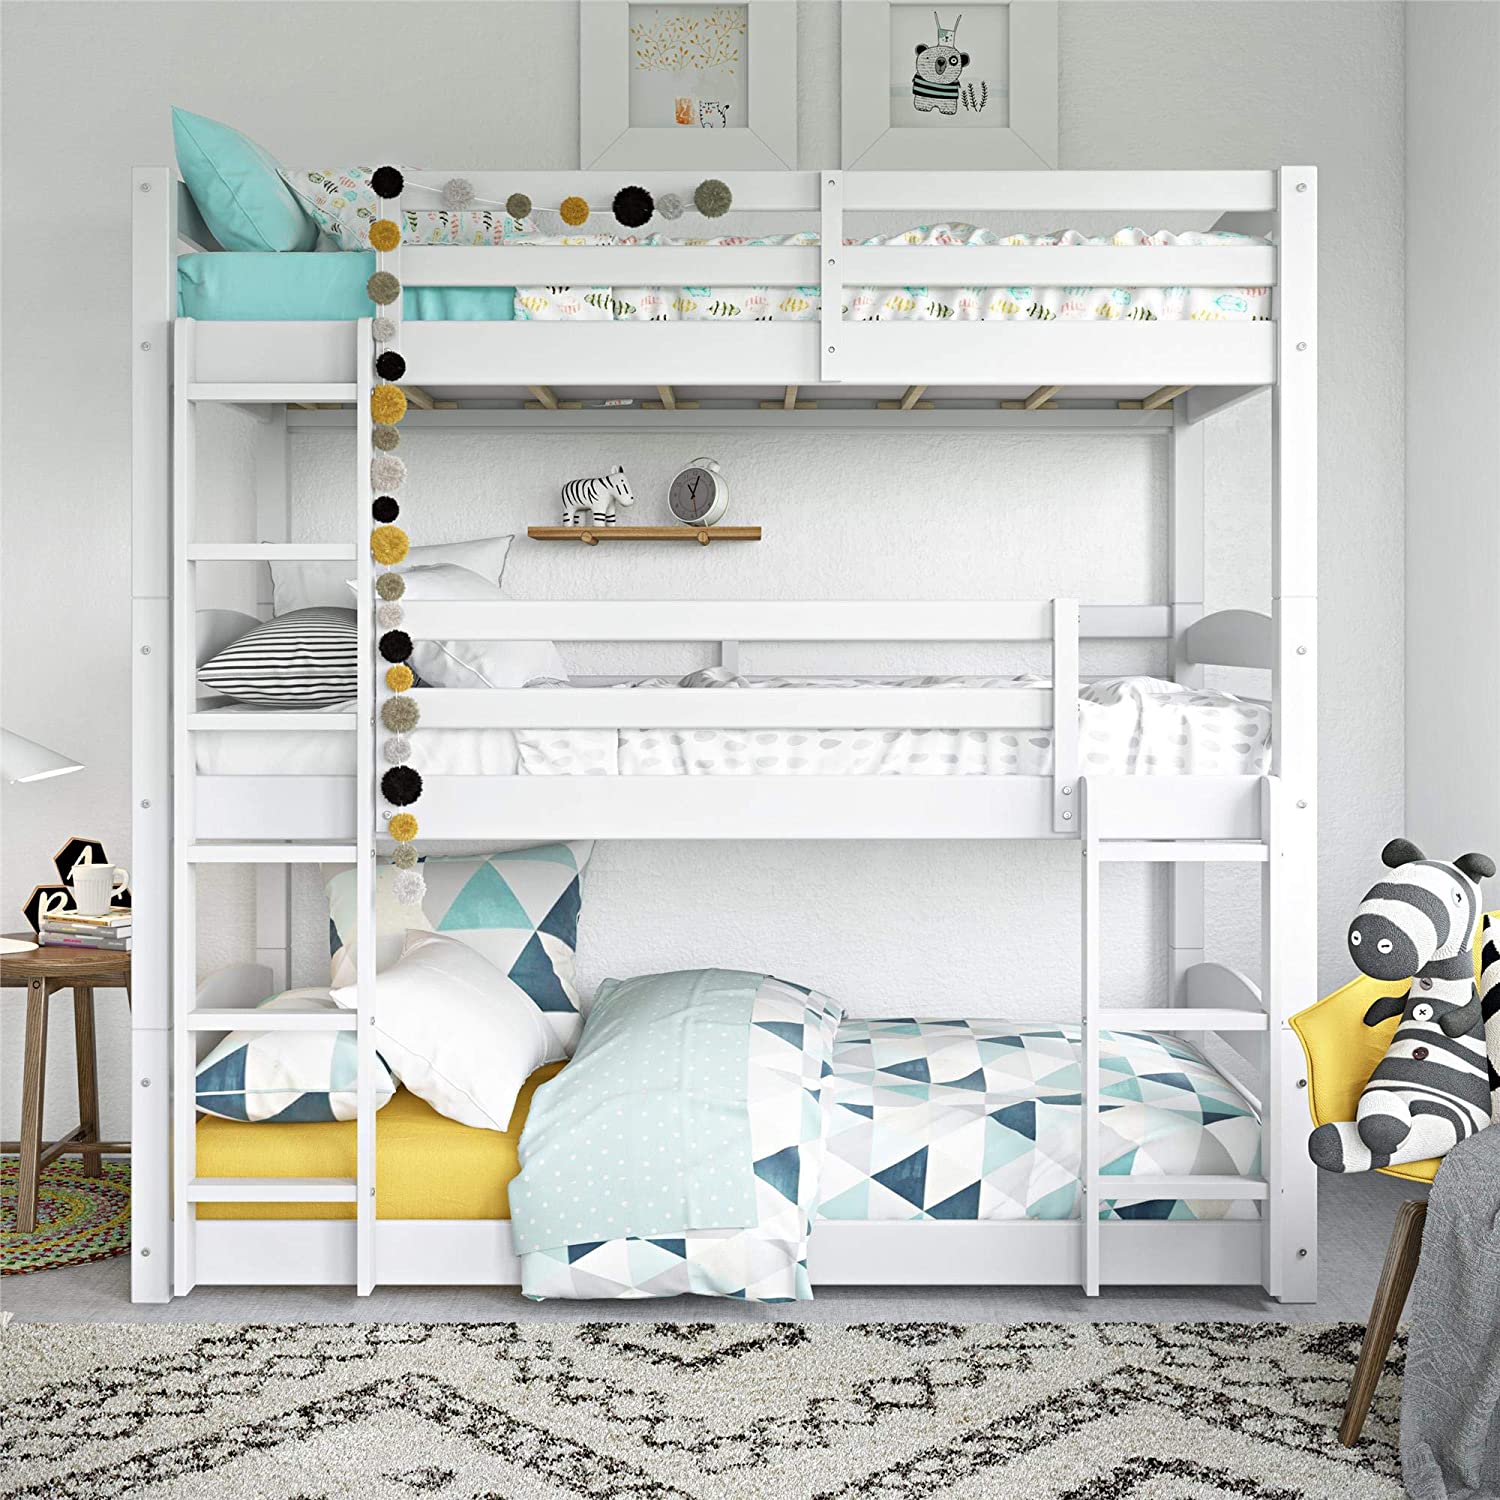 26 Bunk Beds You Ll Want For Yourself, Triple Bunk Beds For Girls